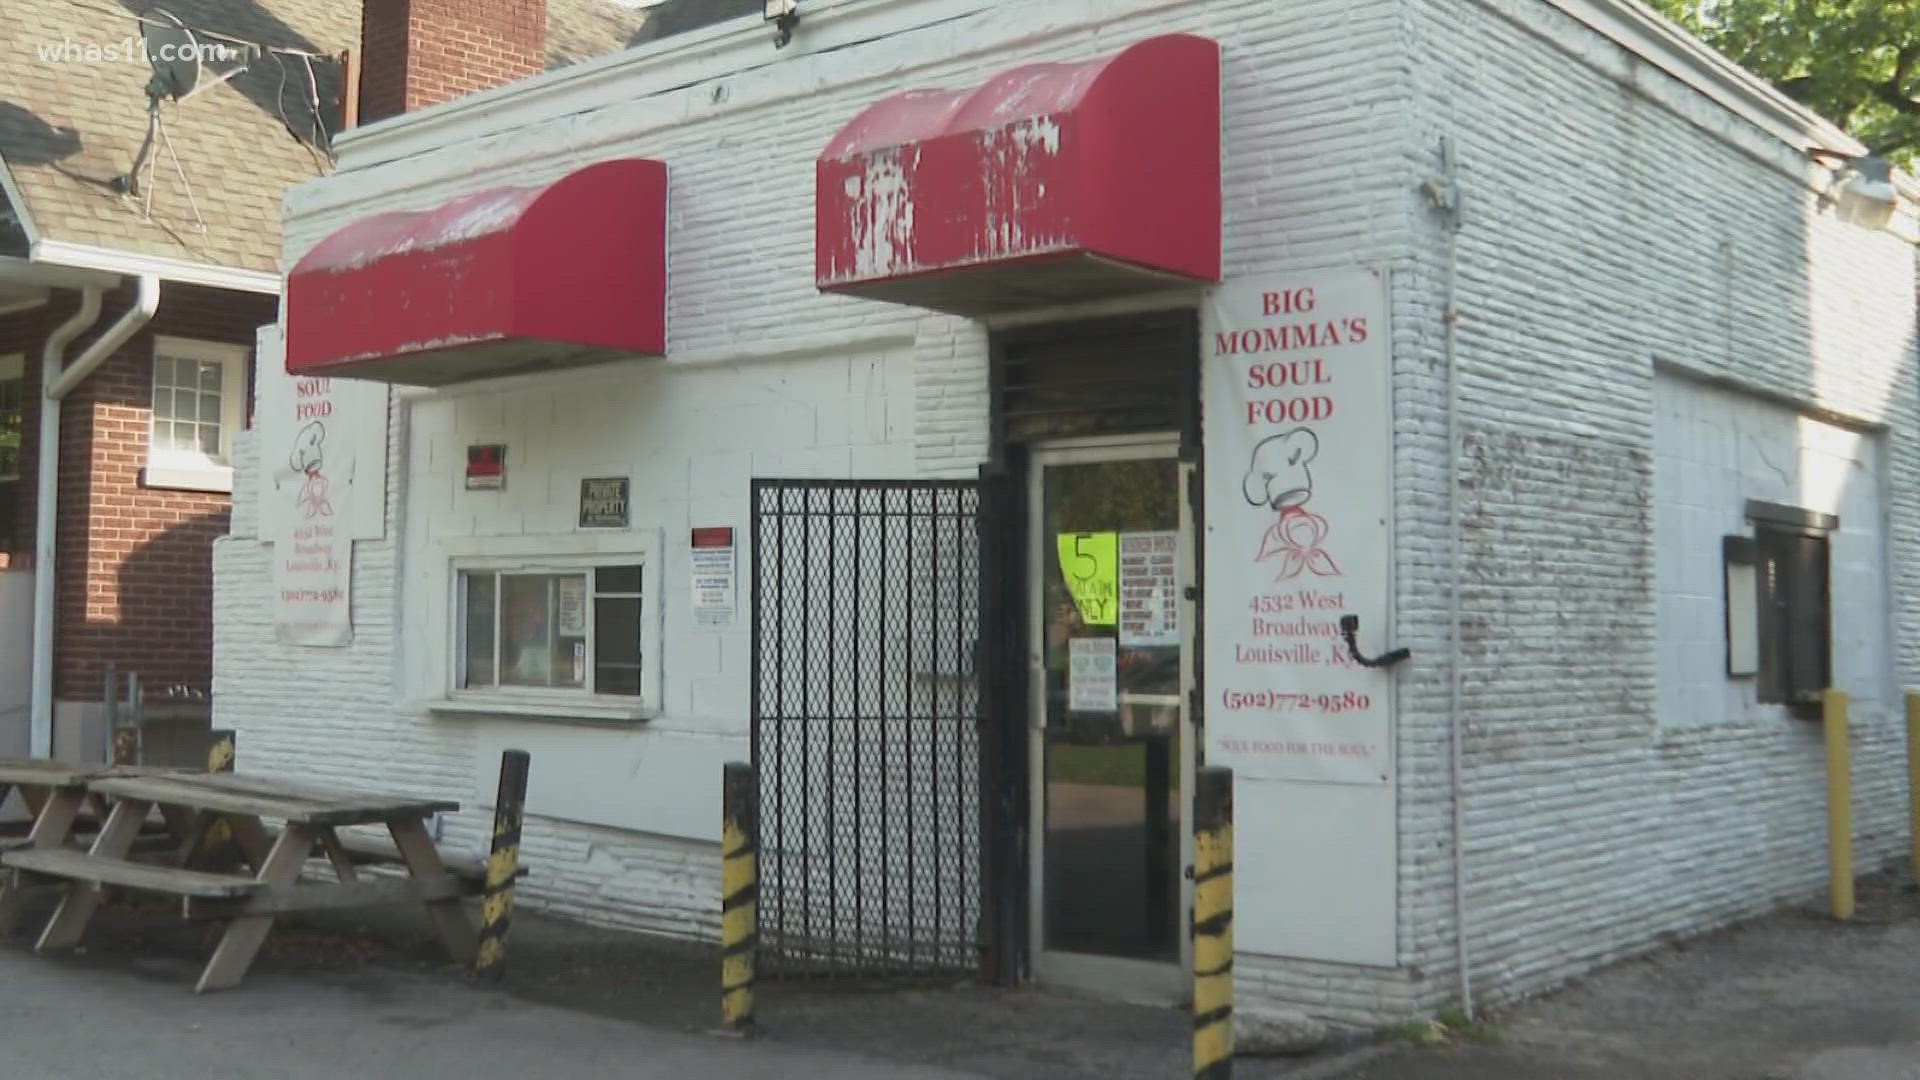 The 45th and Broadway spot has been serving up soul food for nearly 20 years.